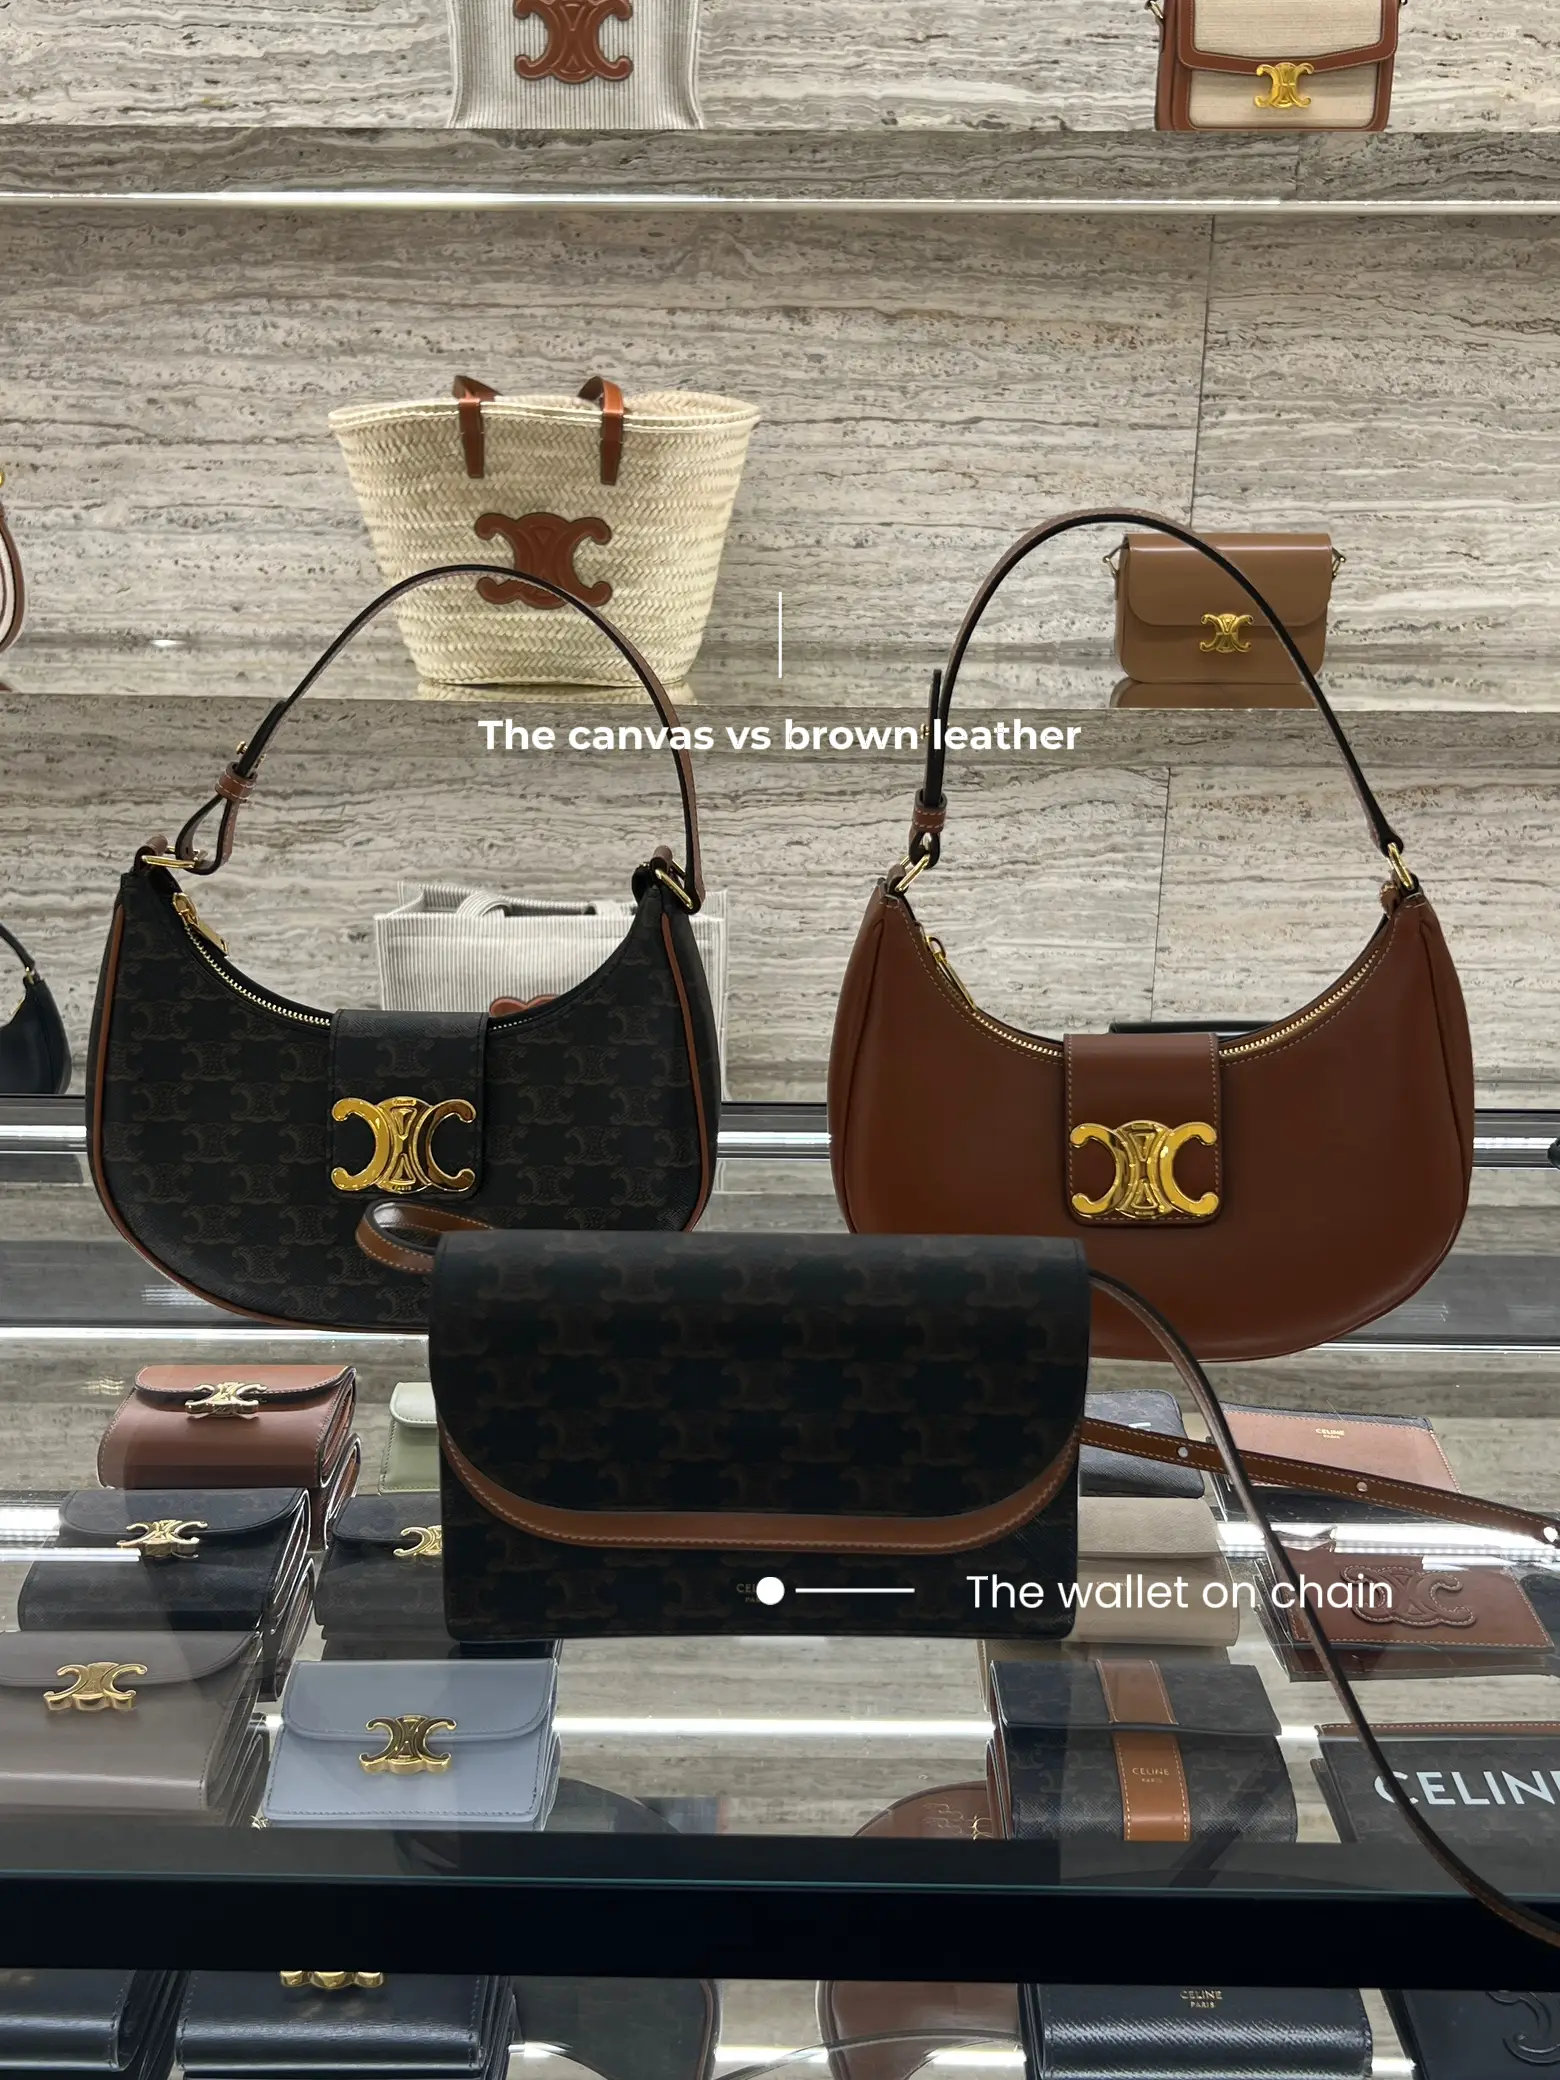 TRYING ON THE NEW CELINE AVA TRIOMPHE HANDBAG, Gallery posted by  michelleorgeta